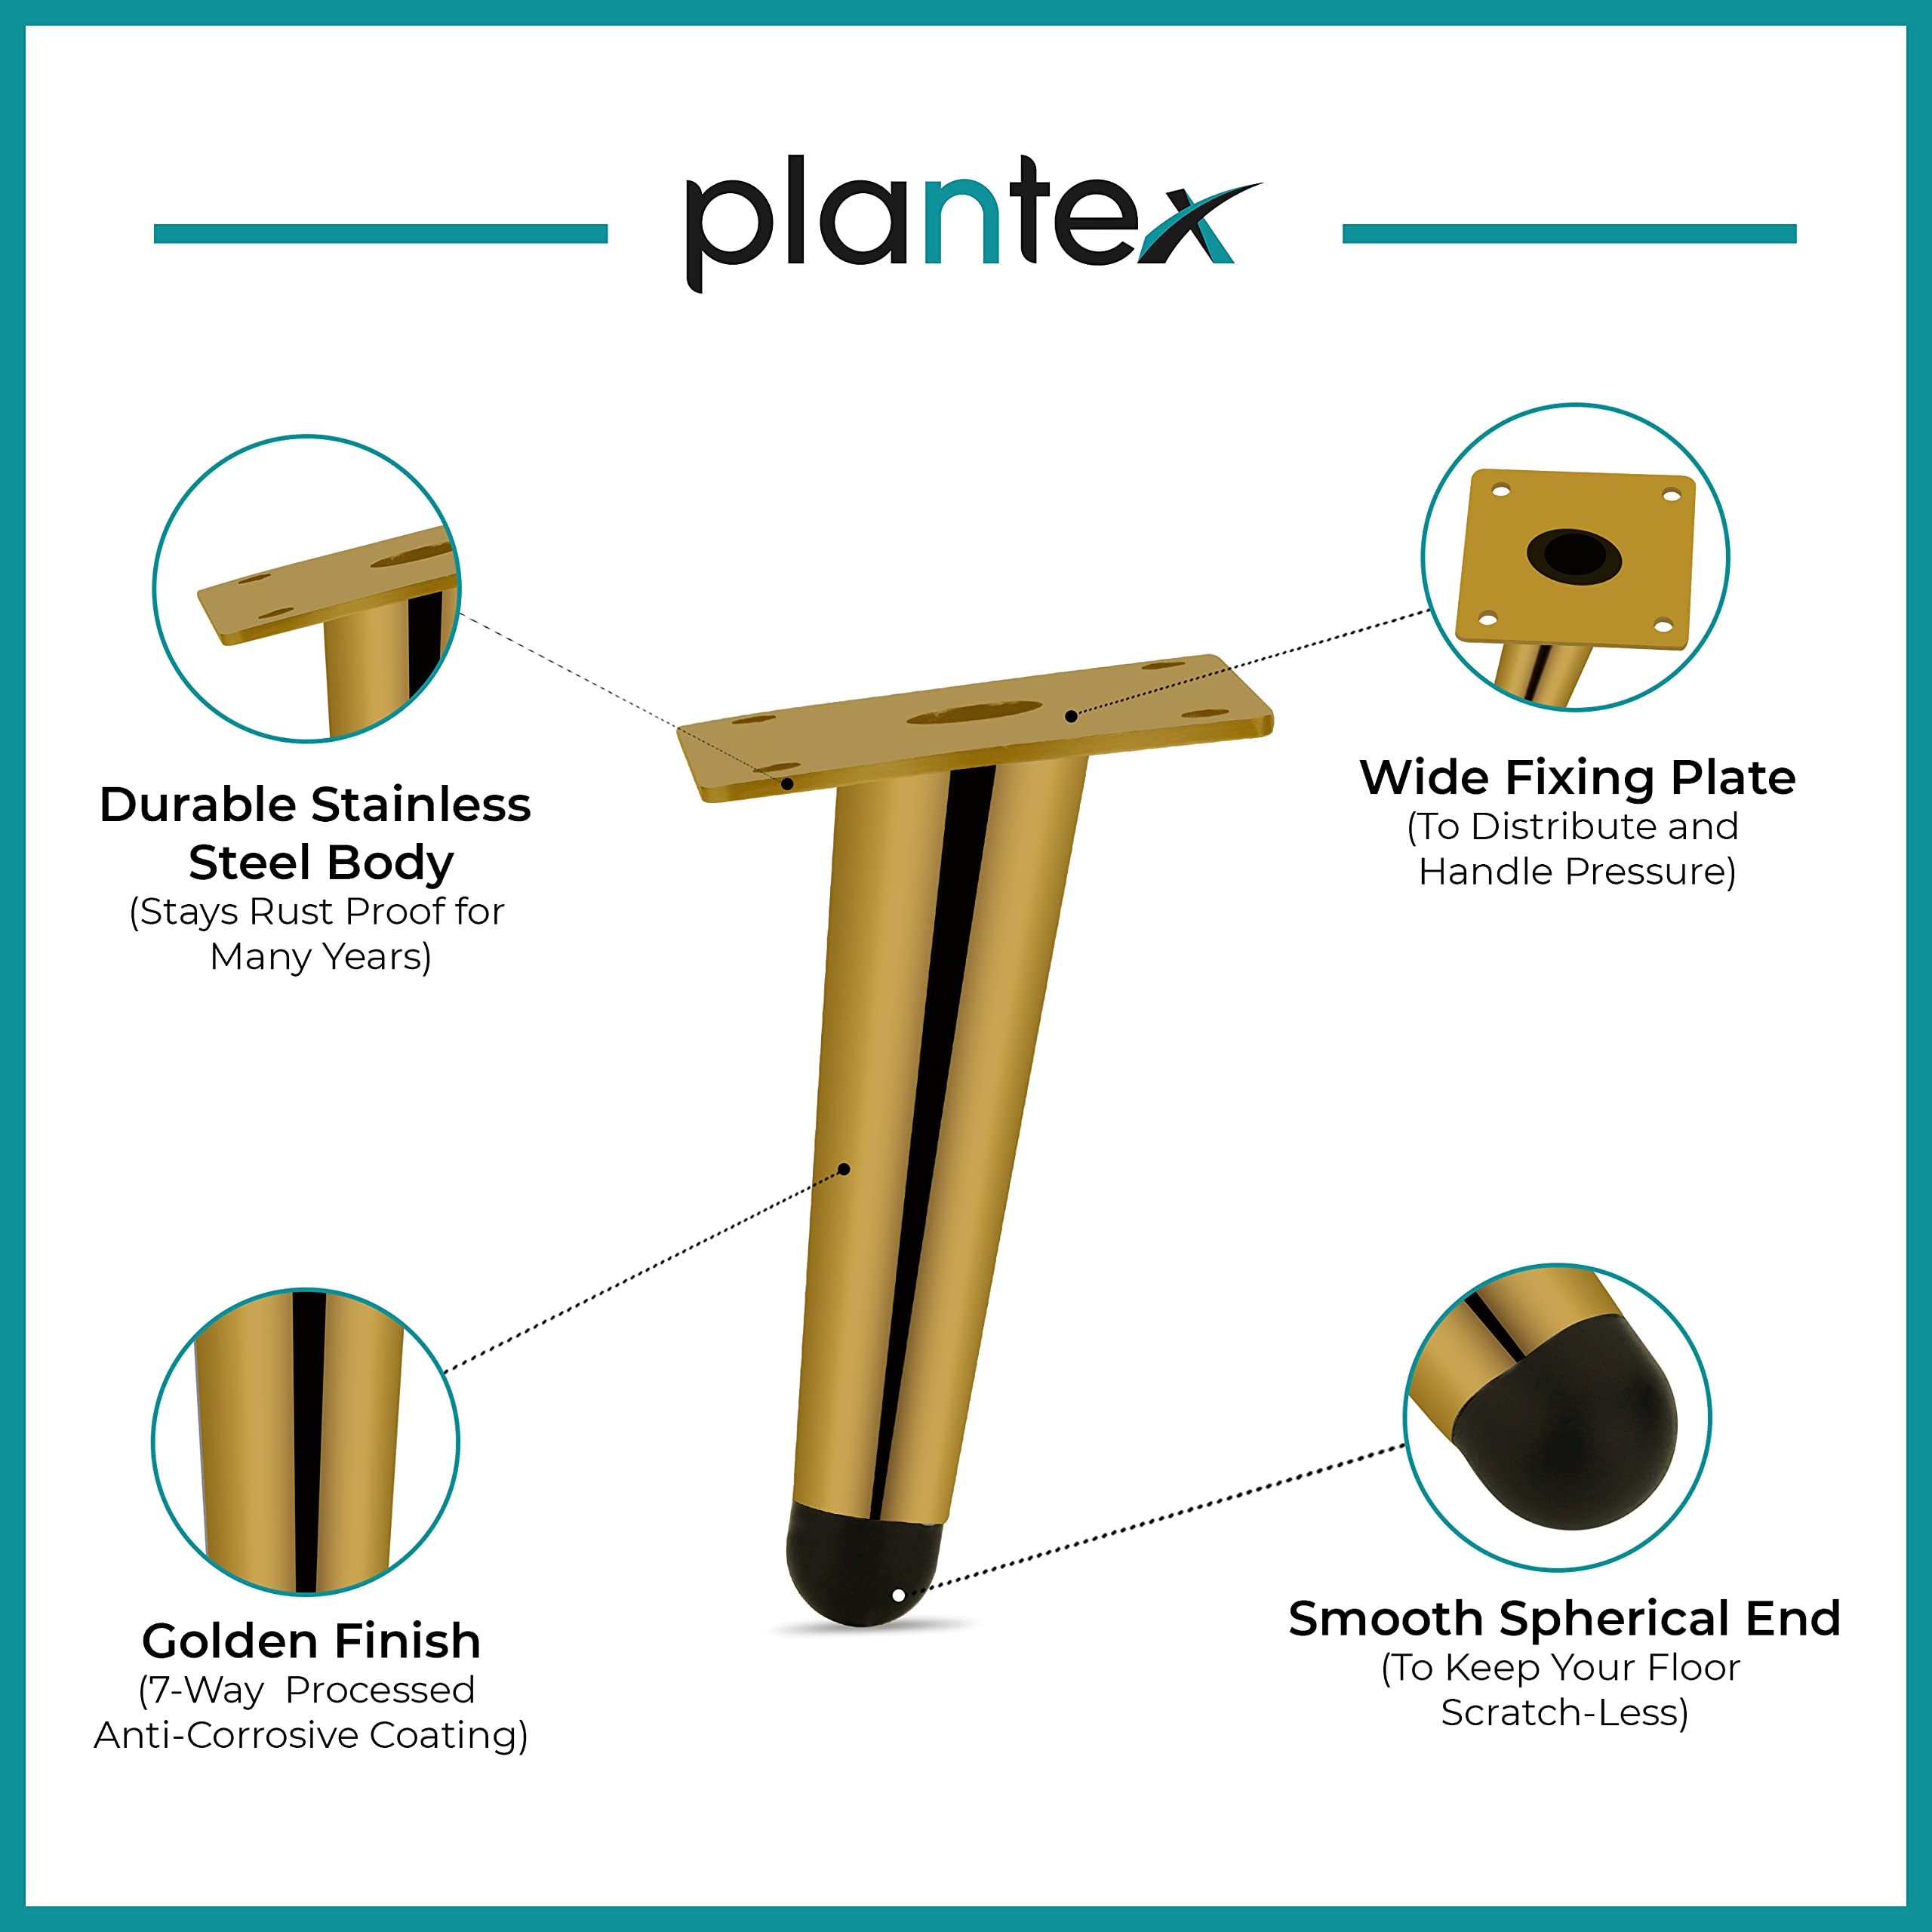 Plantex 304 Grade Stainless Steel 4 inch Sofa Leg/Bed Furniture Leg Pair for Home Furnitures (DTS-54-Gold) – 6 Pcs